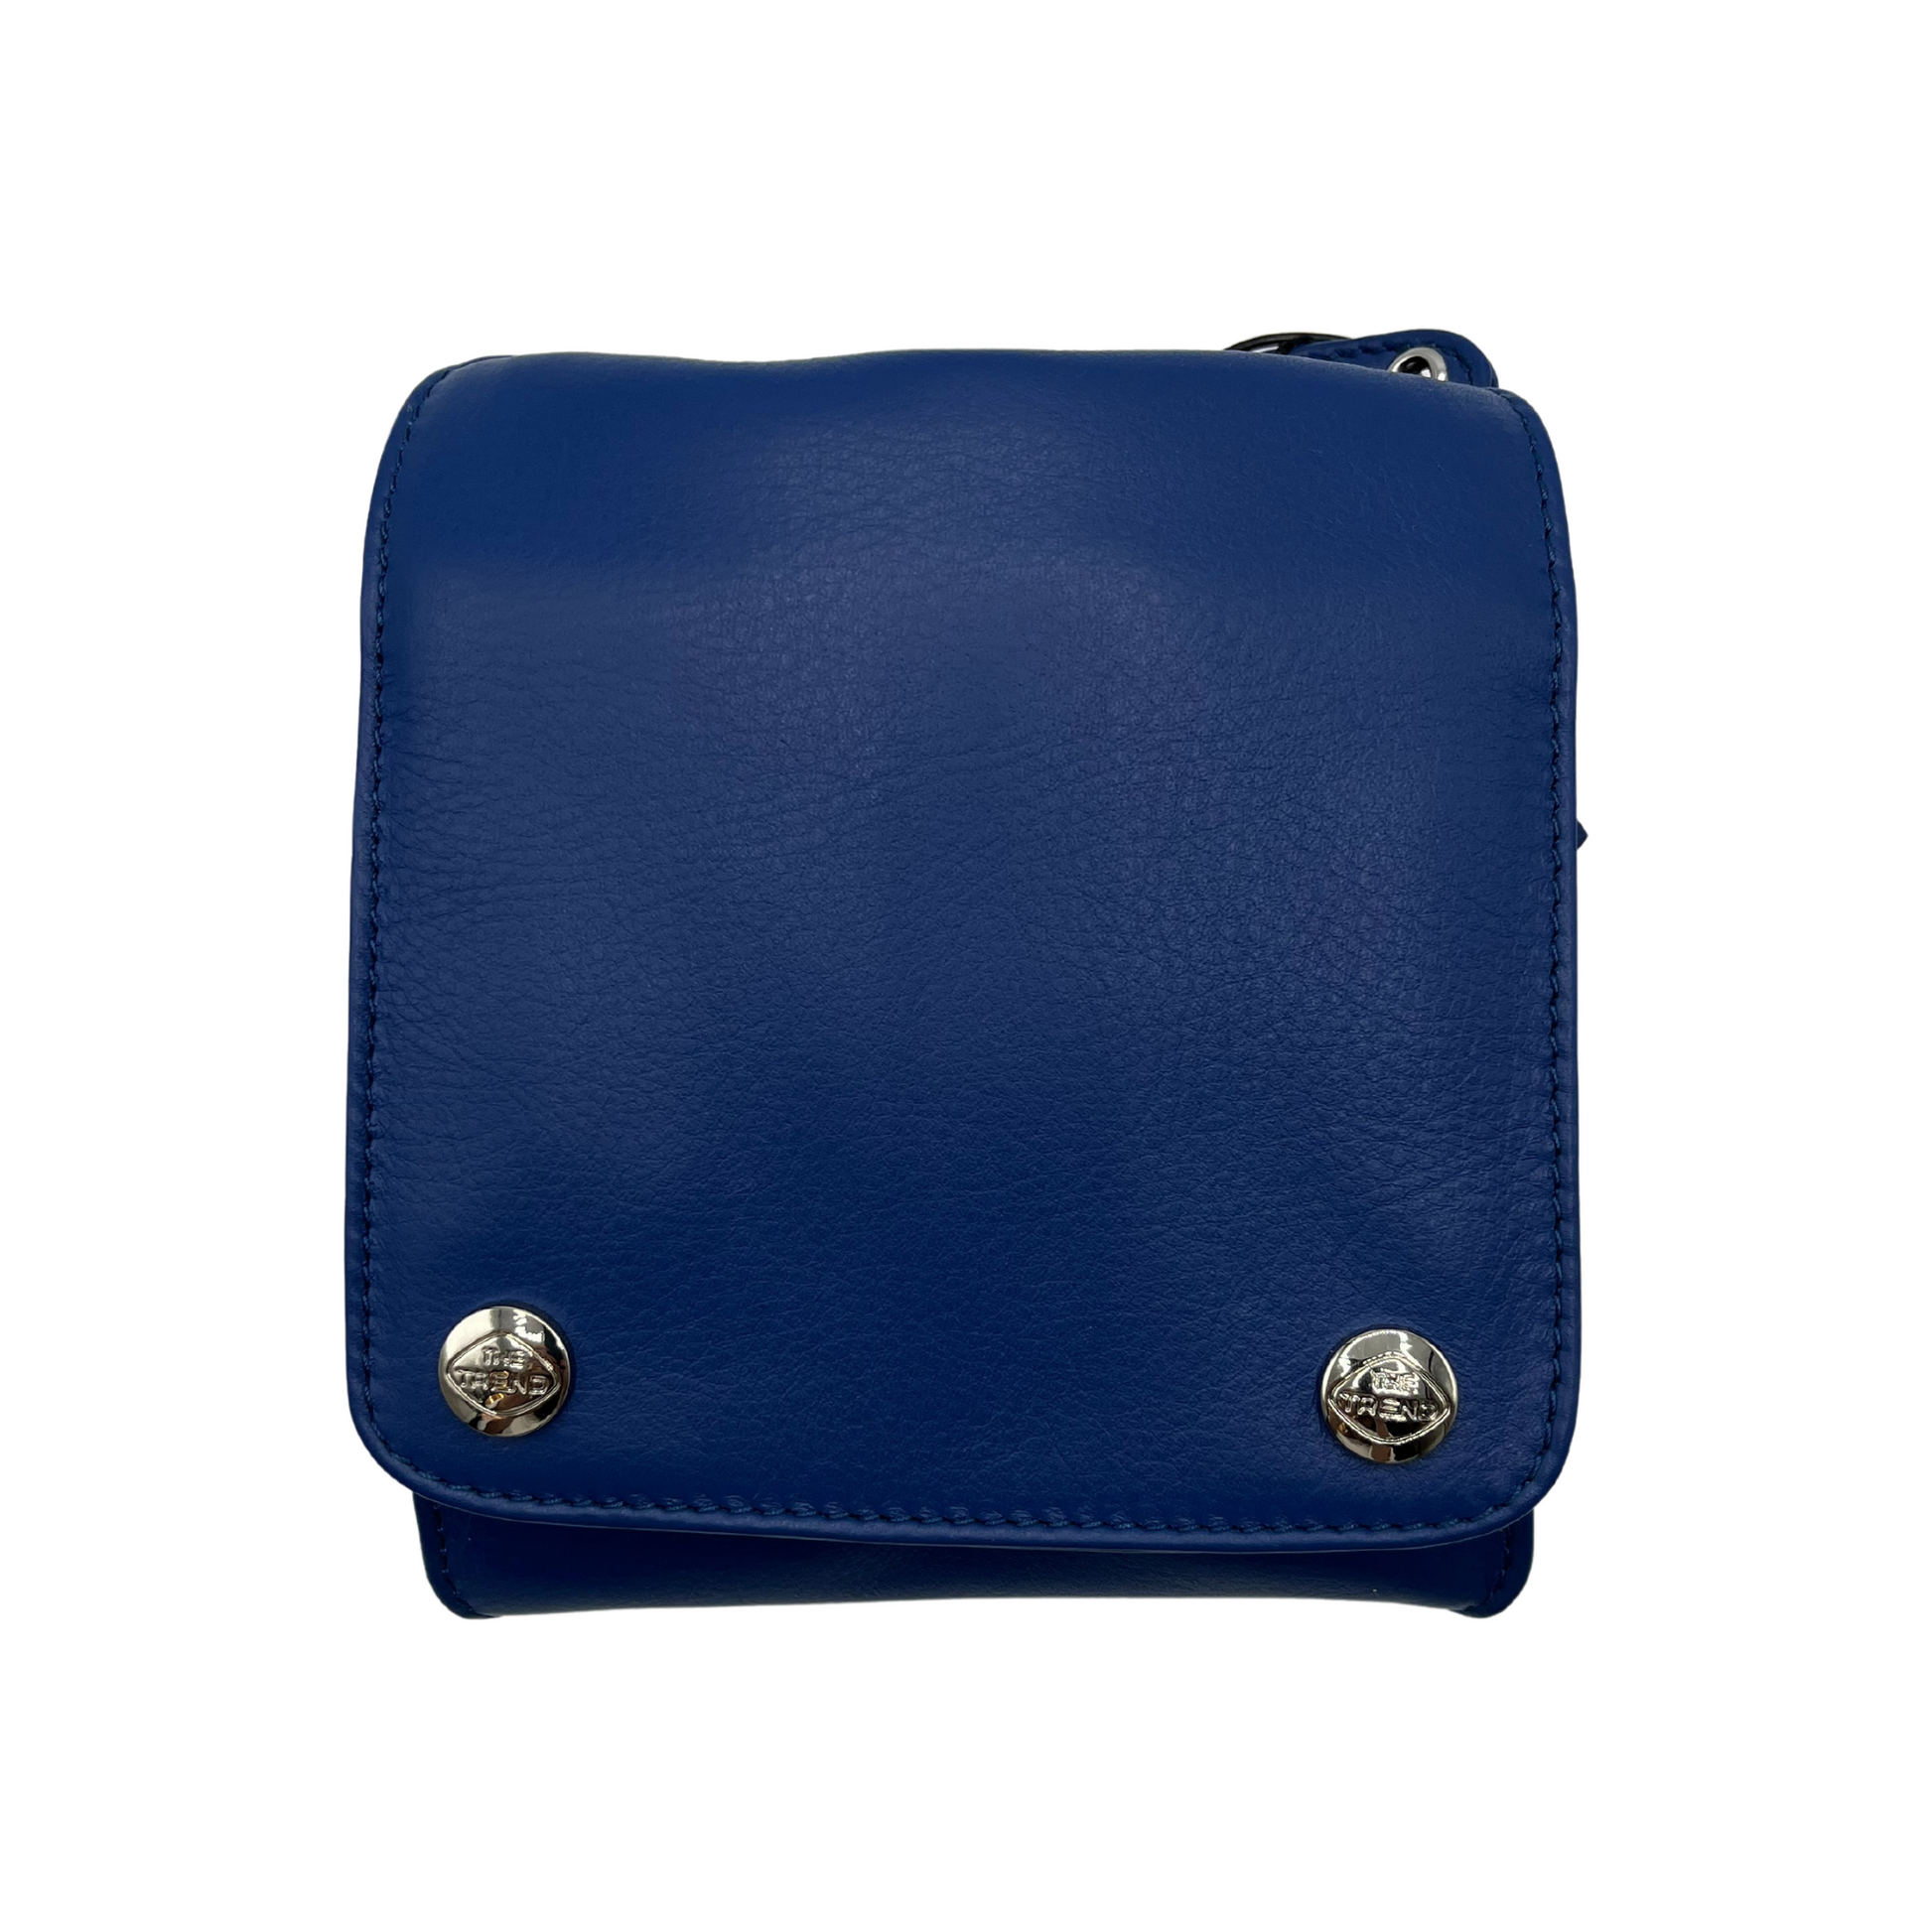 The front of a rich blue leather bag, with a square face and two shiny silver metal buttons, each bearing "The Trend" logo.